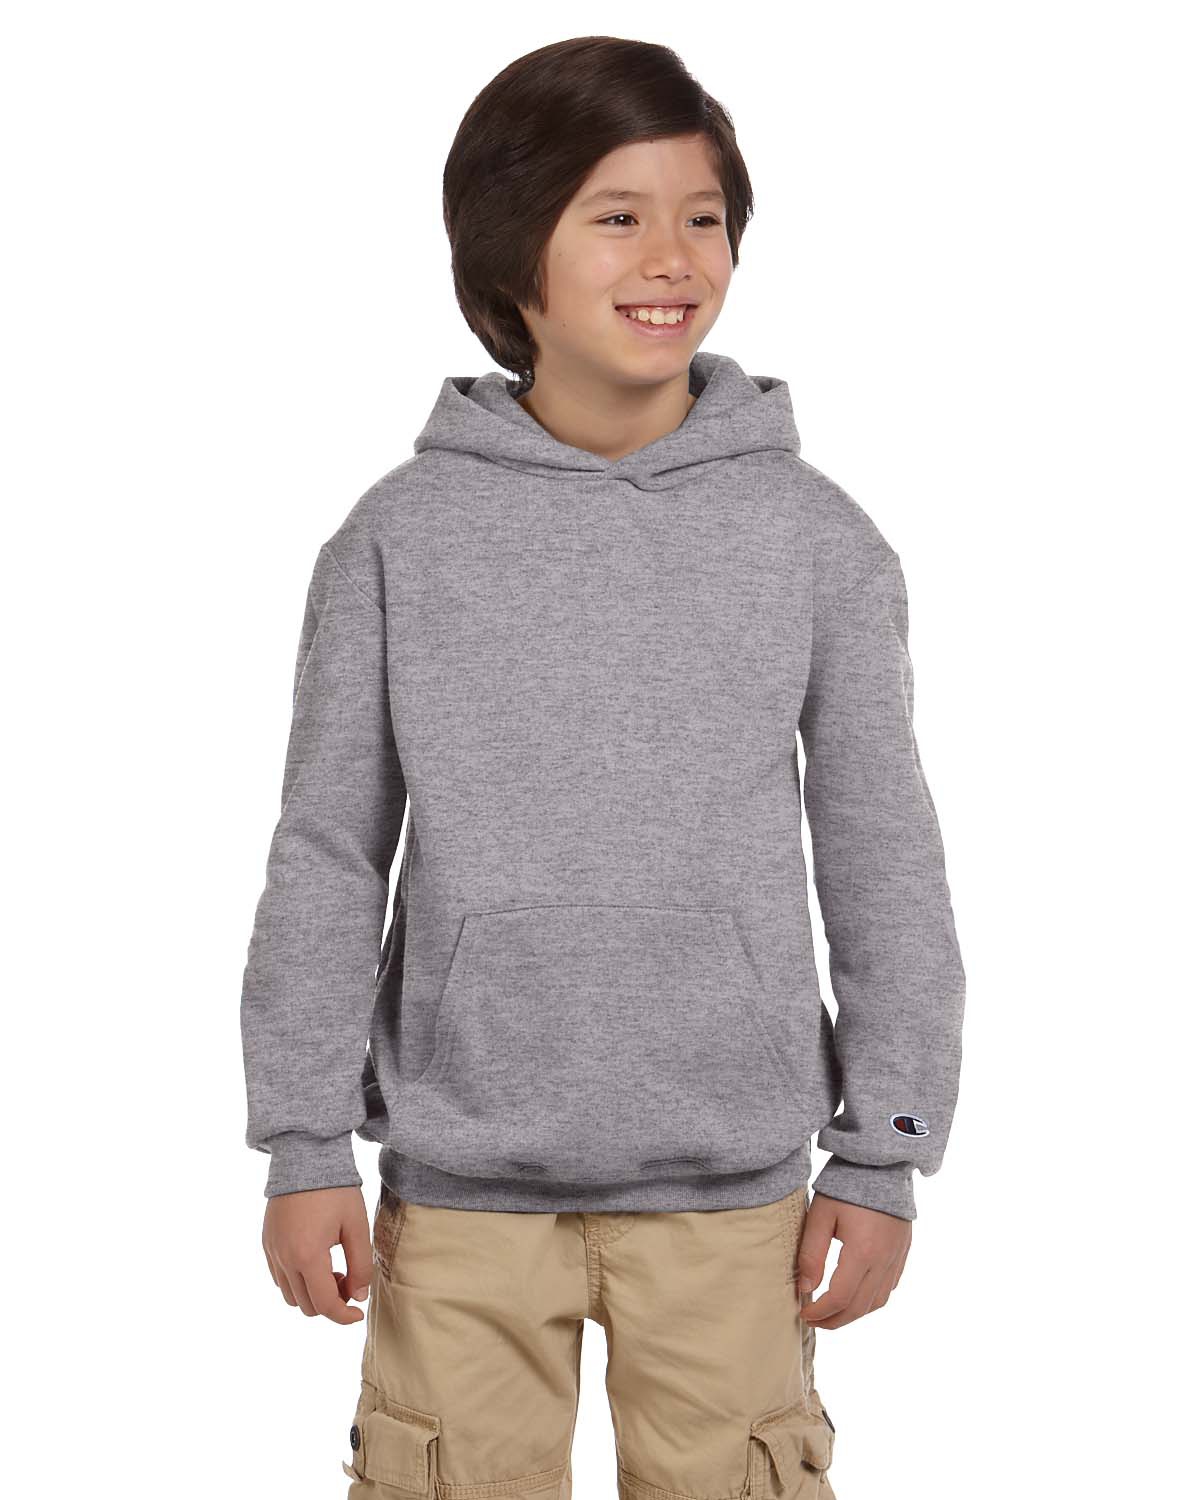 'Champion S790 Youth Double Dry Action Fleece Pullover Hood'